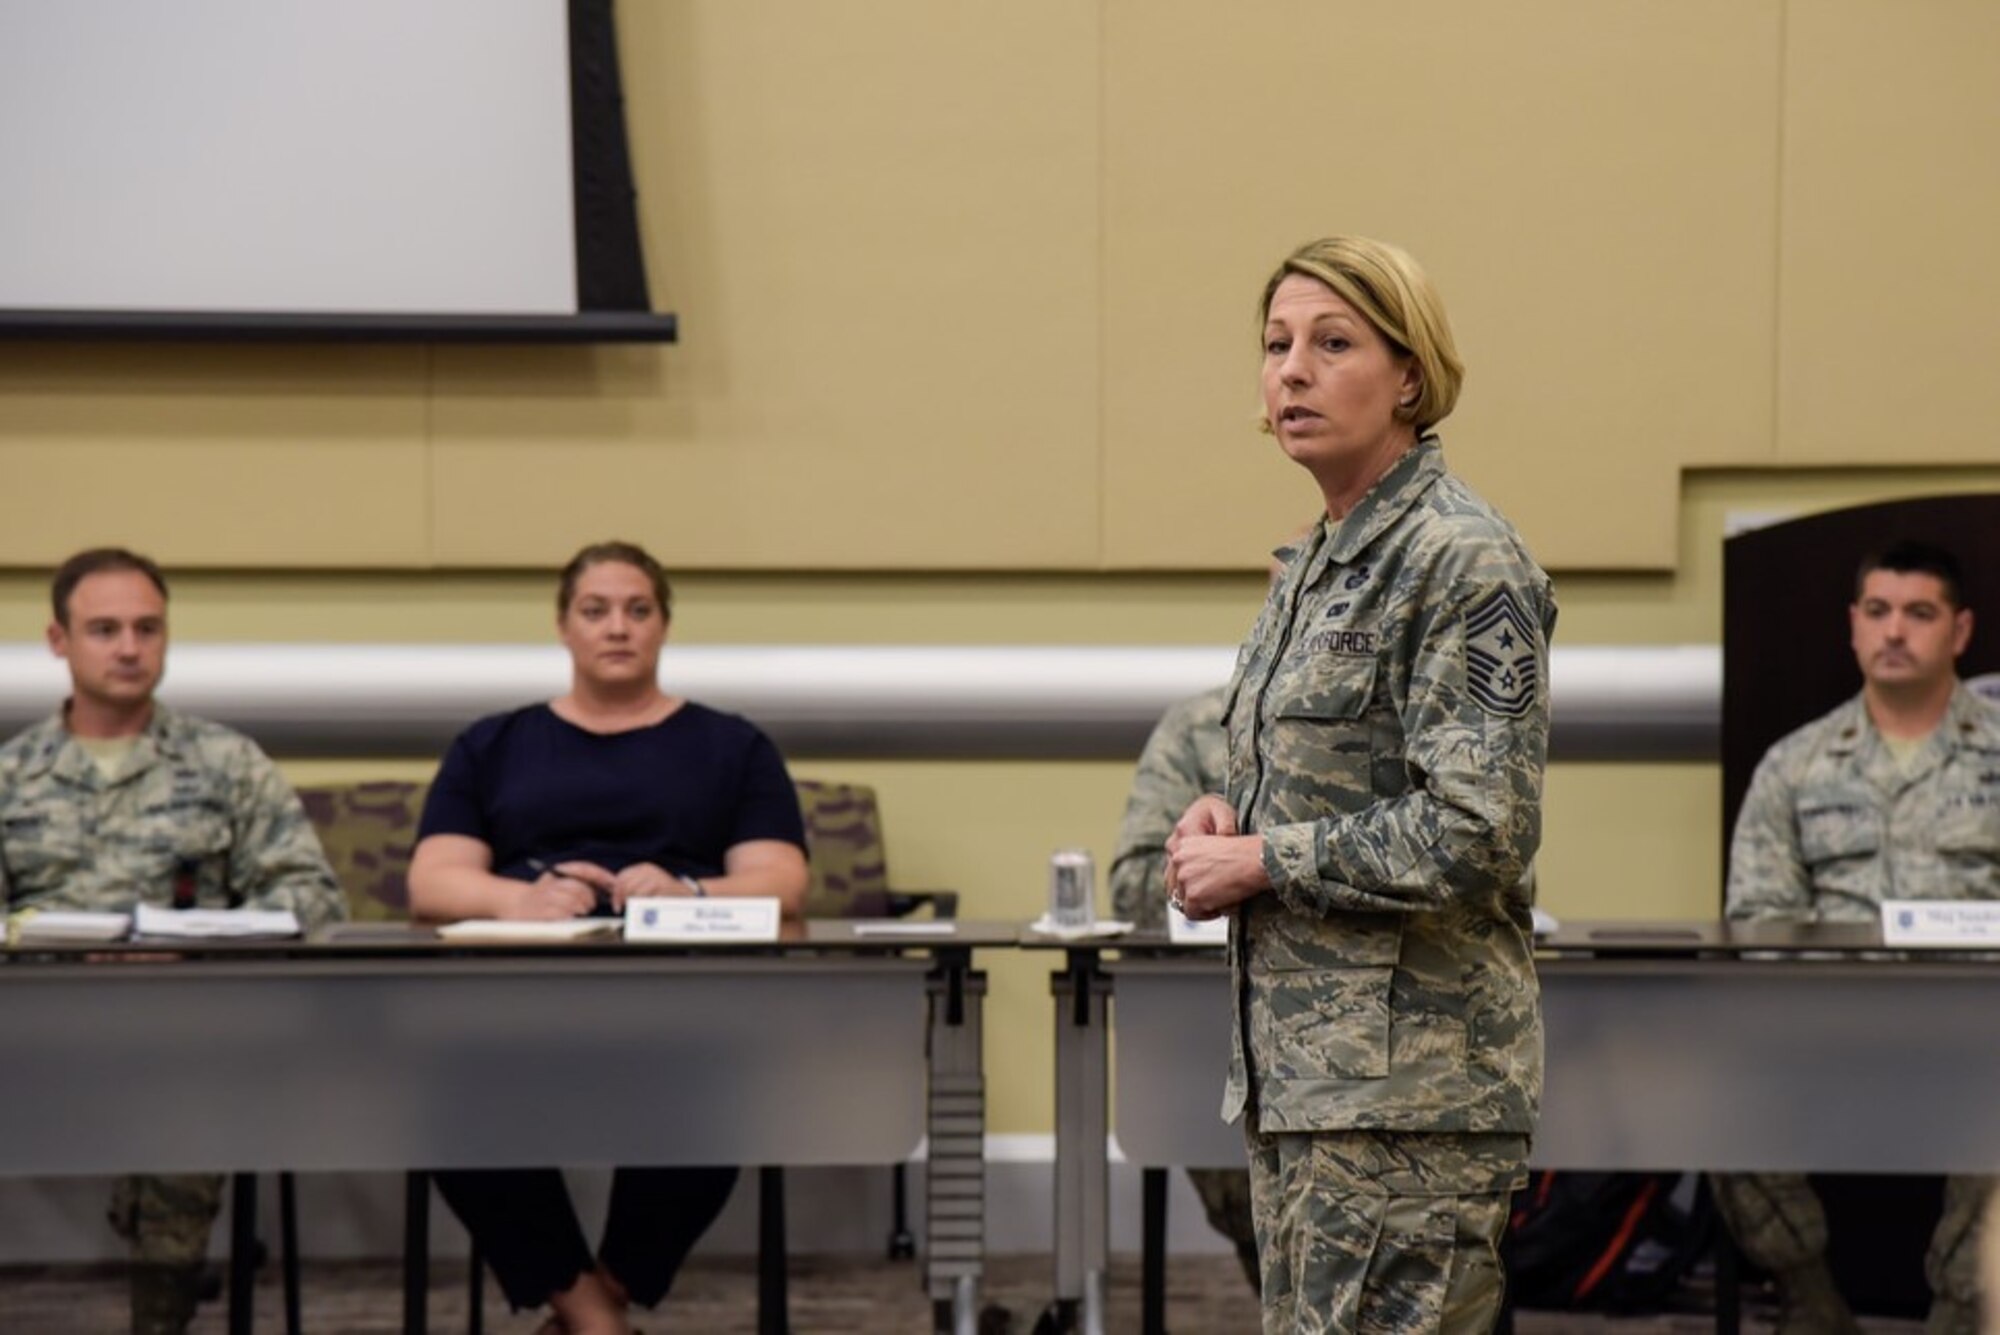 Air Force District of Washington Command Chief Master Sgt. Melanie K. Noel discusses the value of courageous leadership in remarks during the 2018 AFDW Squadron Commanders Course in the Gen. Jacob E. Smart Conference Center here May 18.